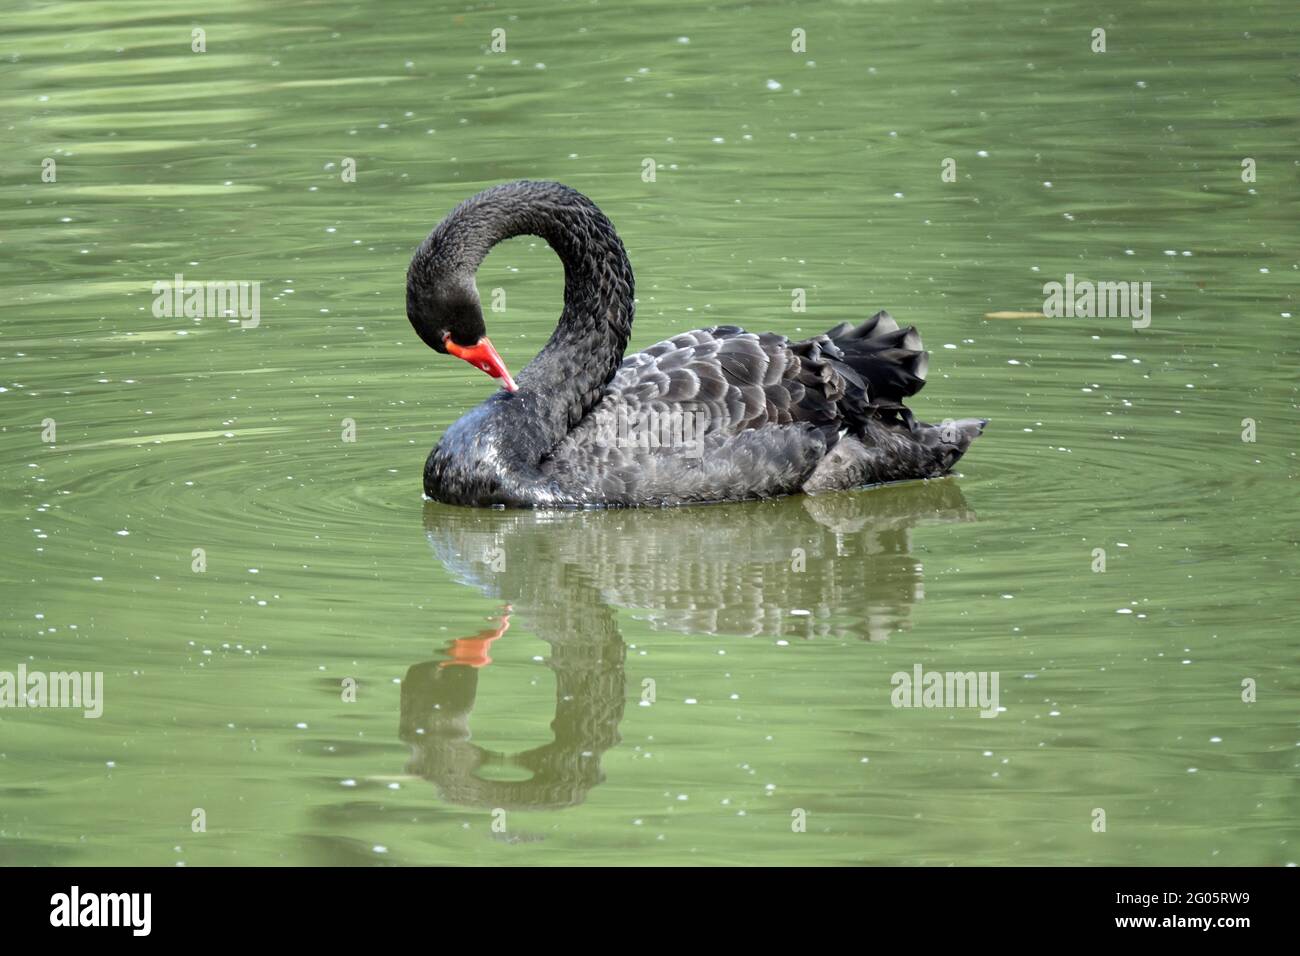 Mourning Swan High Resolution Stock Photography and Images - Alamy